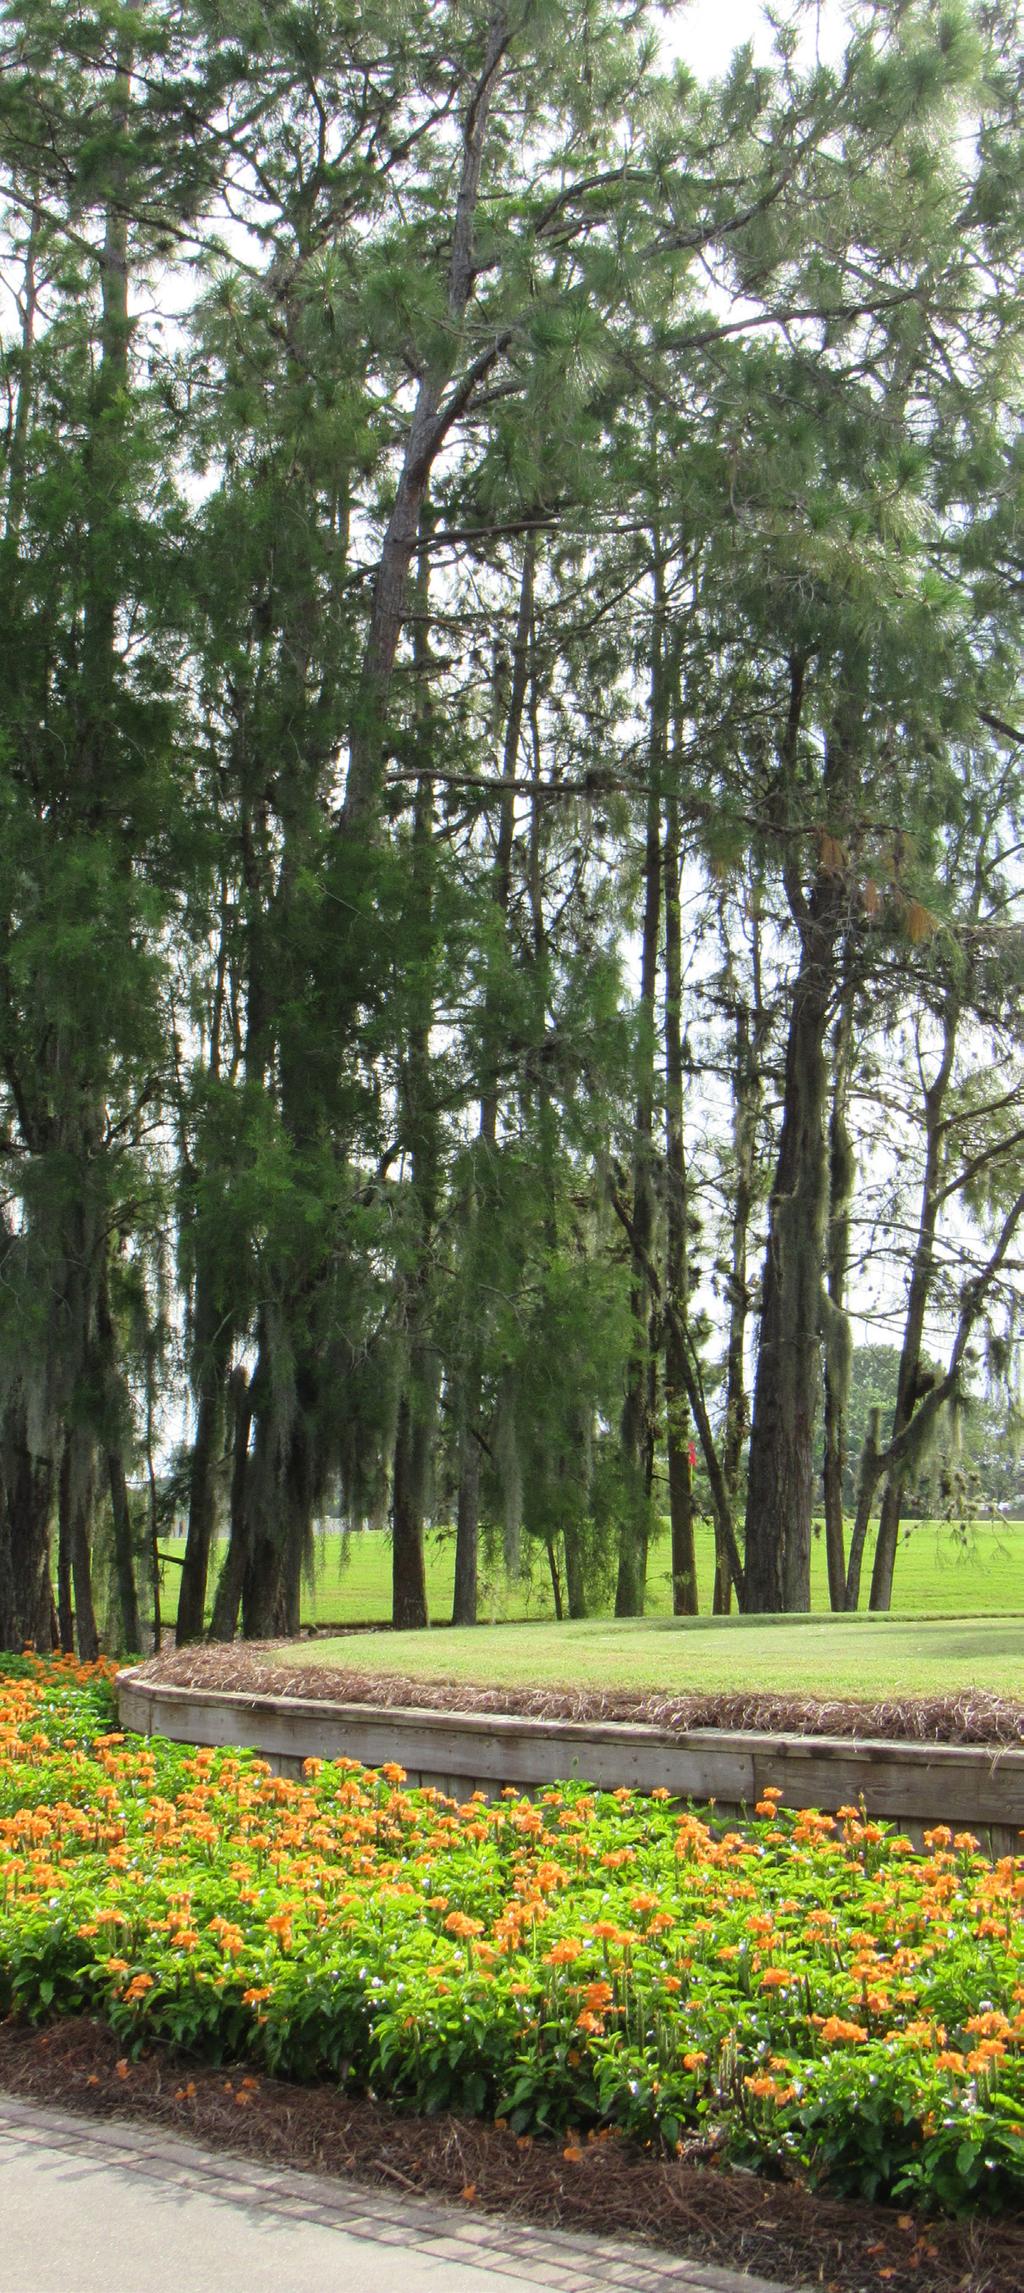 Our private golfing community is nestled among hundreds of